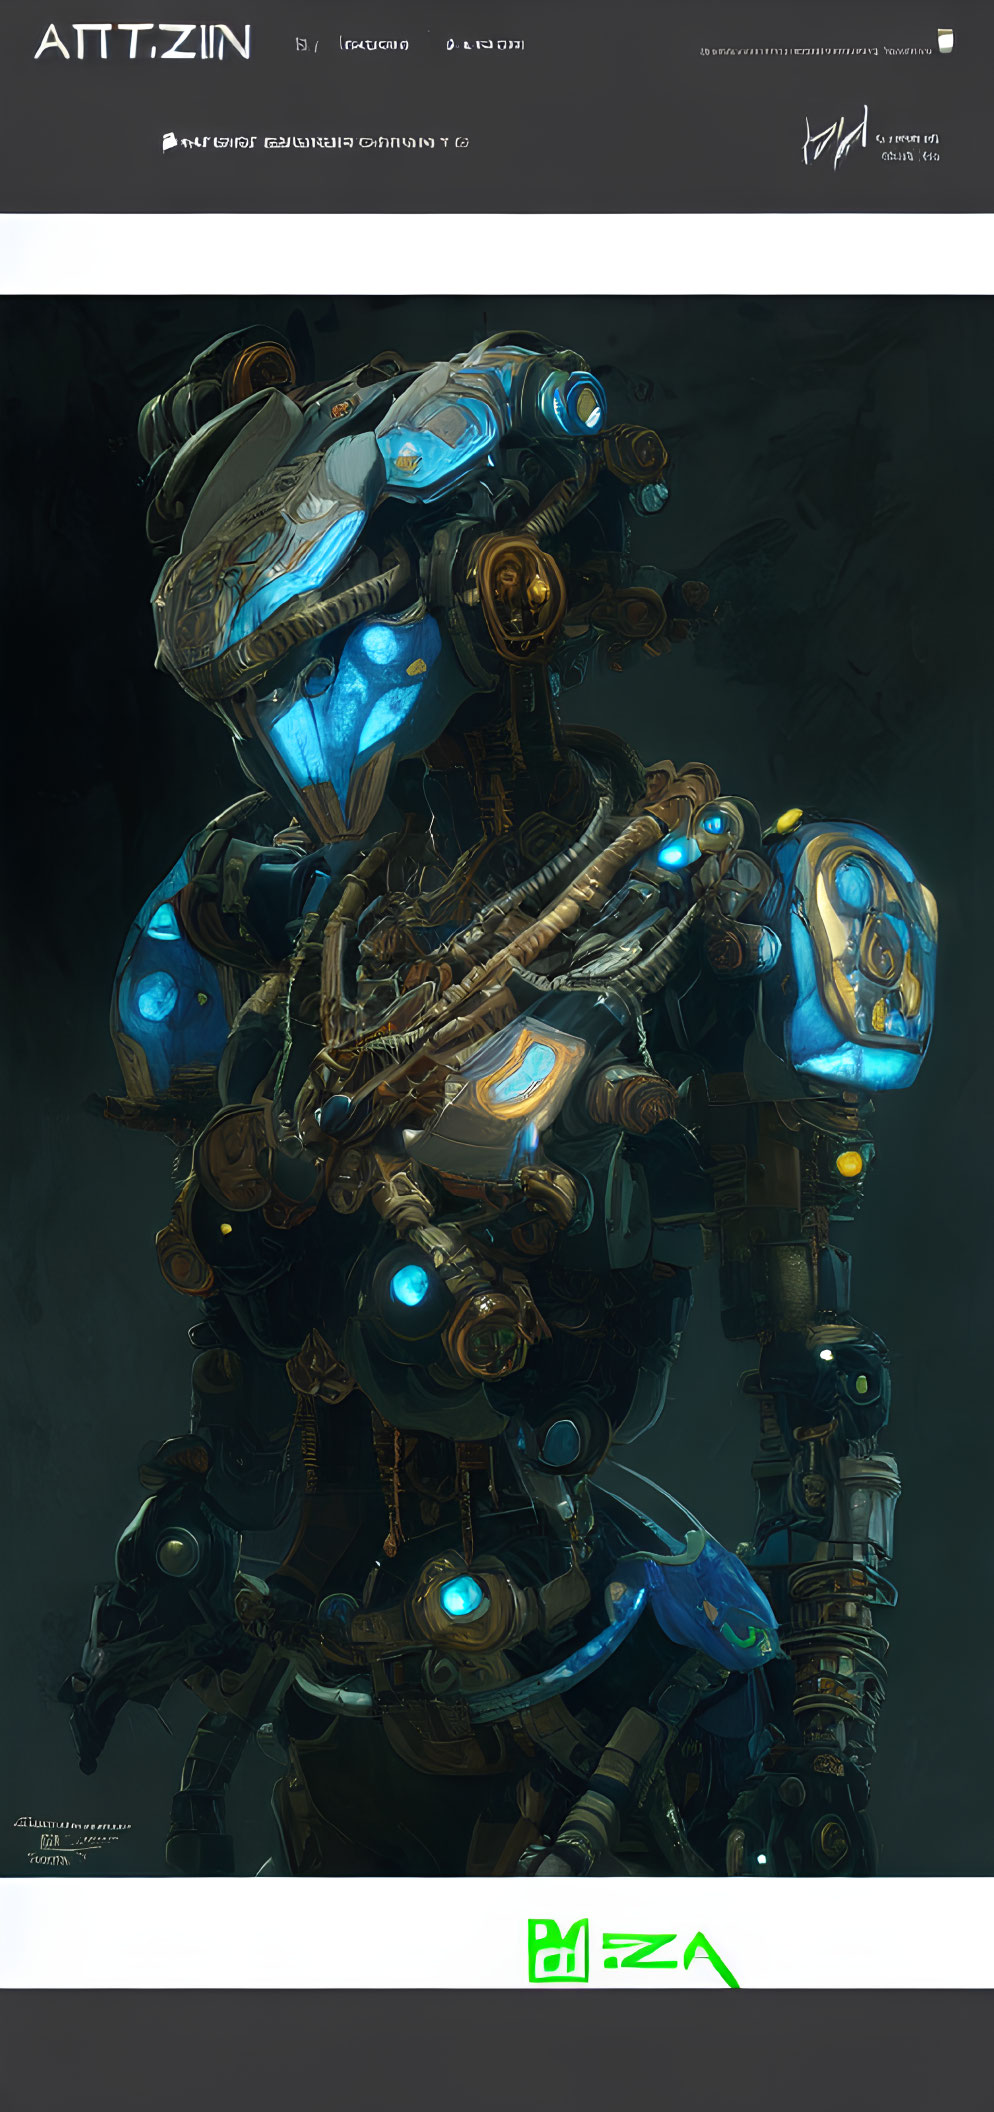 Intricate futuristic robot with glowing blue elements on dark background